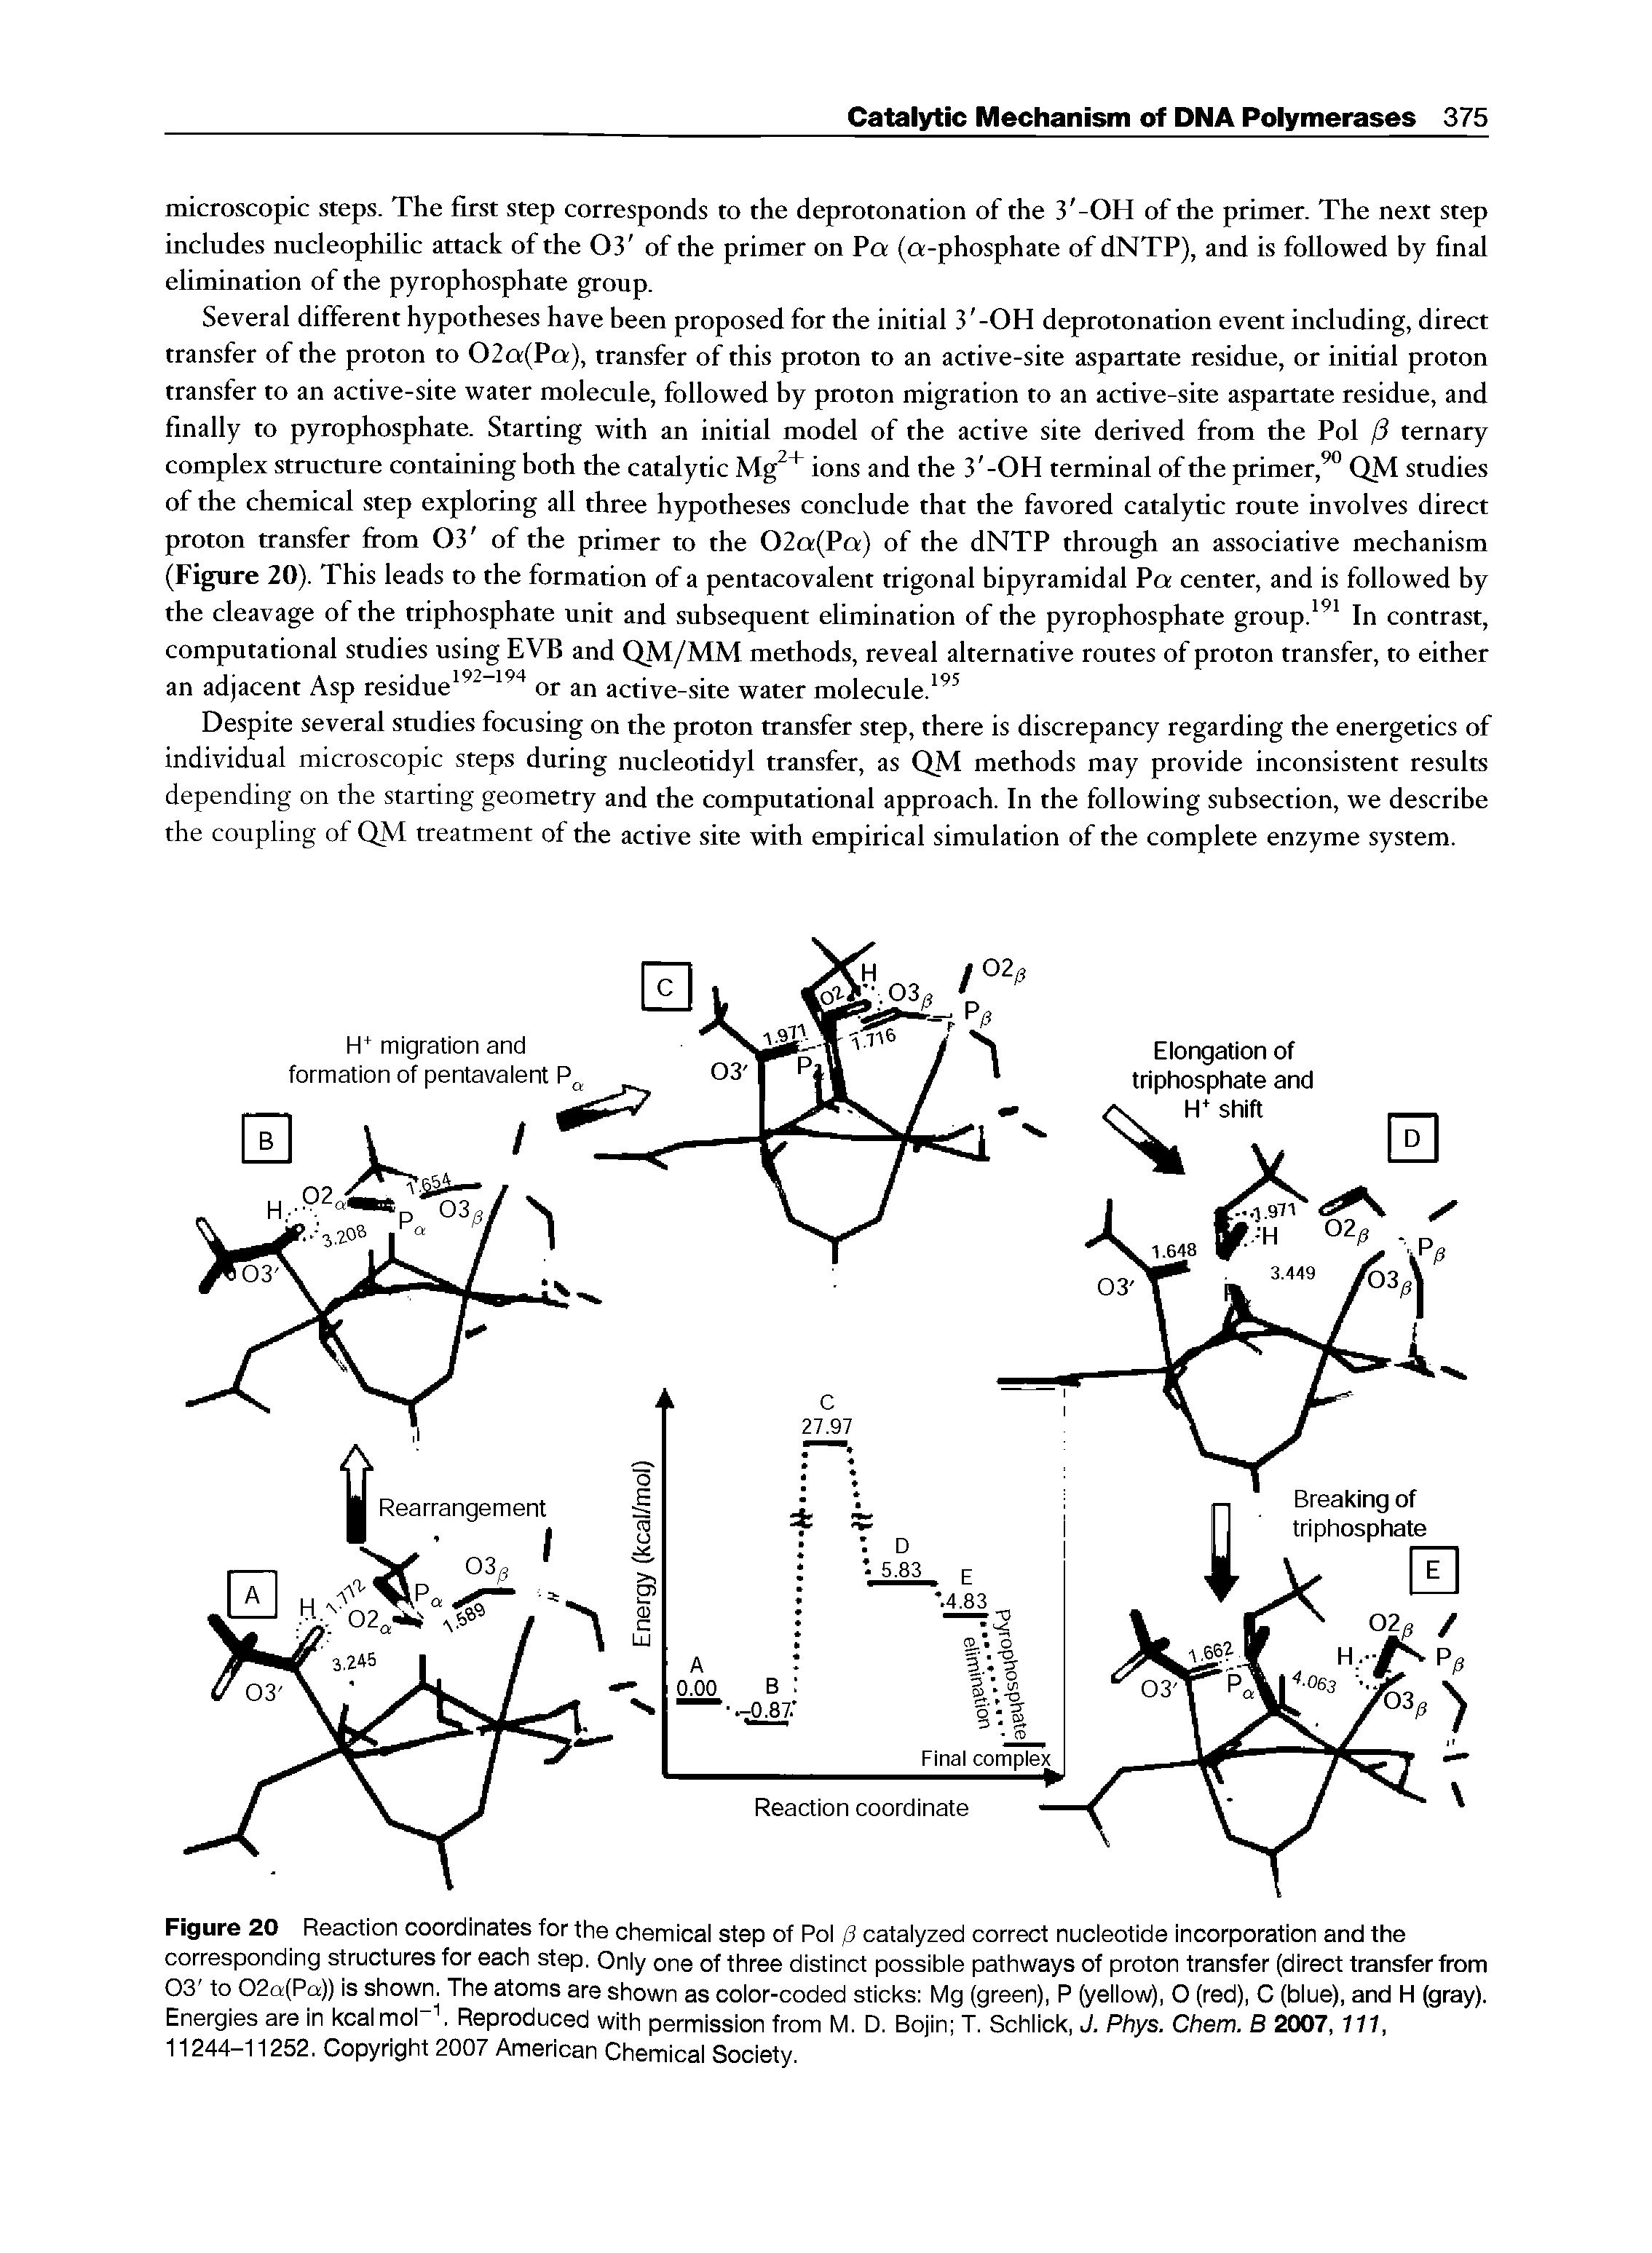 Figure 20 Reaction coordinates for the chemicai step of Poi /3 cataiyzed correct nucieotide incorporation and the corresponding structures for each step. Oniy one of three distinct possibie pathways of proton transfer (direct transfer from 03 to 02a(Pa)) is shown. The atoms are shown as coior-coded sticks Mg (green), P (yeiiow), O (red), C (biue), and H (gray). Energies are in kcaimoi Reproduced with permission from M. D. Bojin T. Schiick, J. Phys. Chem. B 2007, 111, 11244-11252. Copyright 2007 American Chemicai Society.